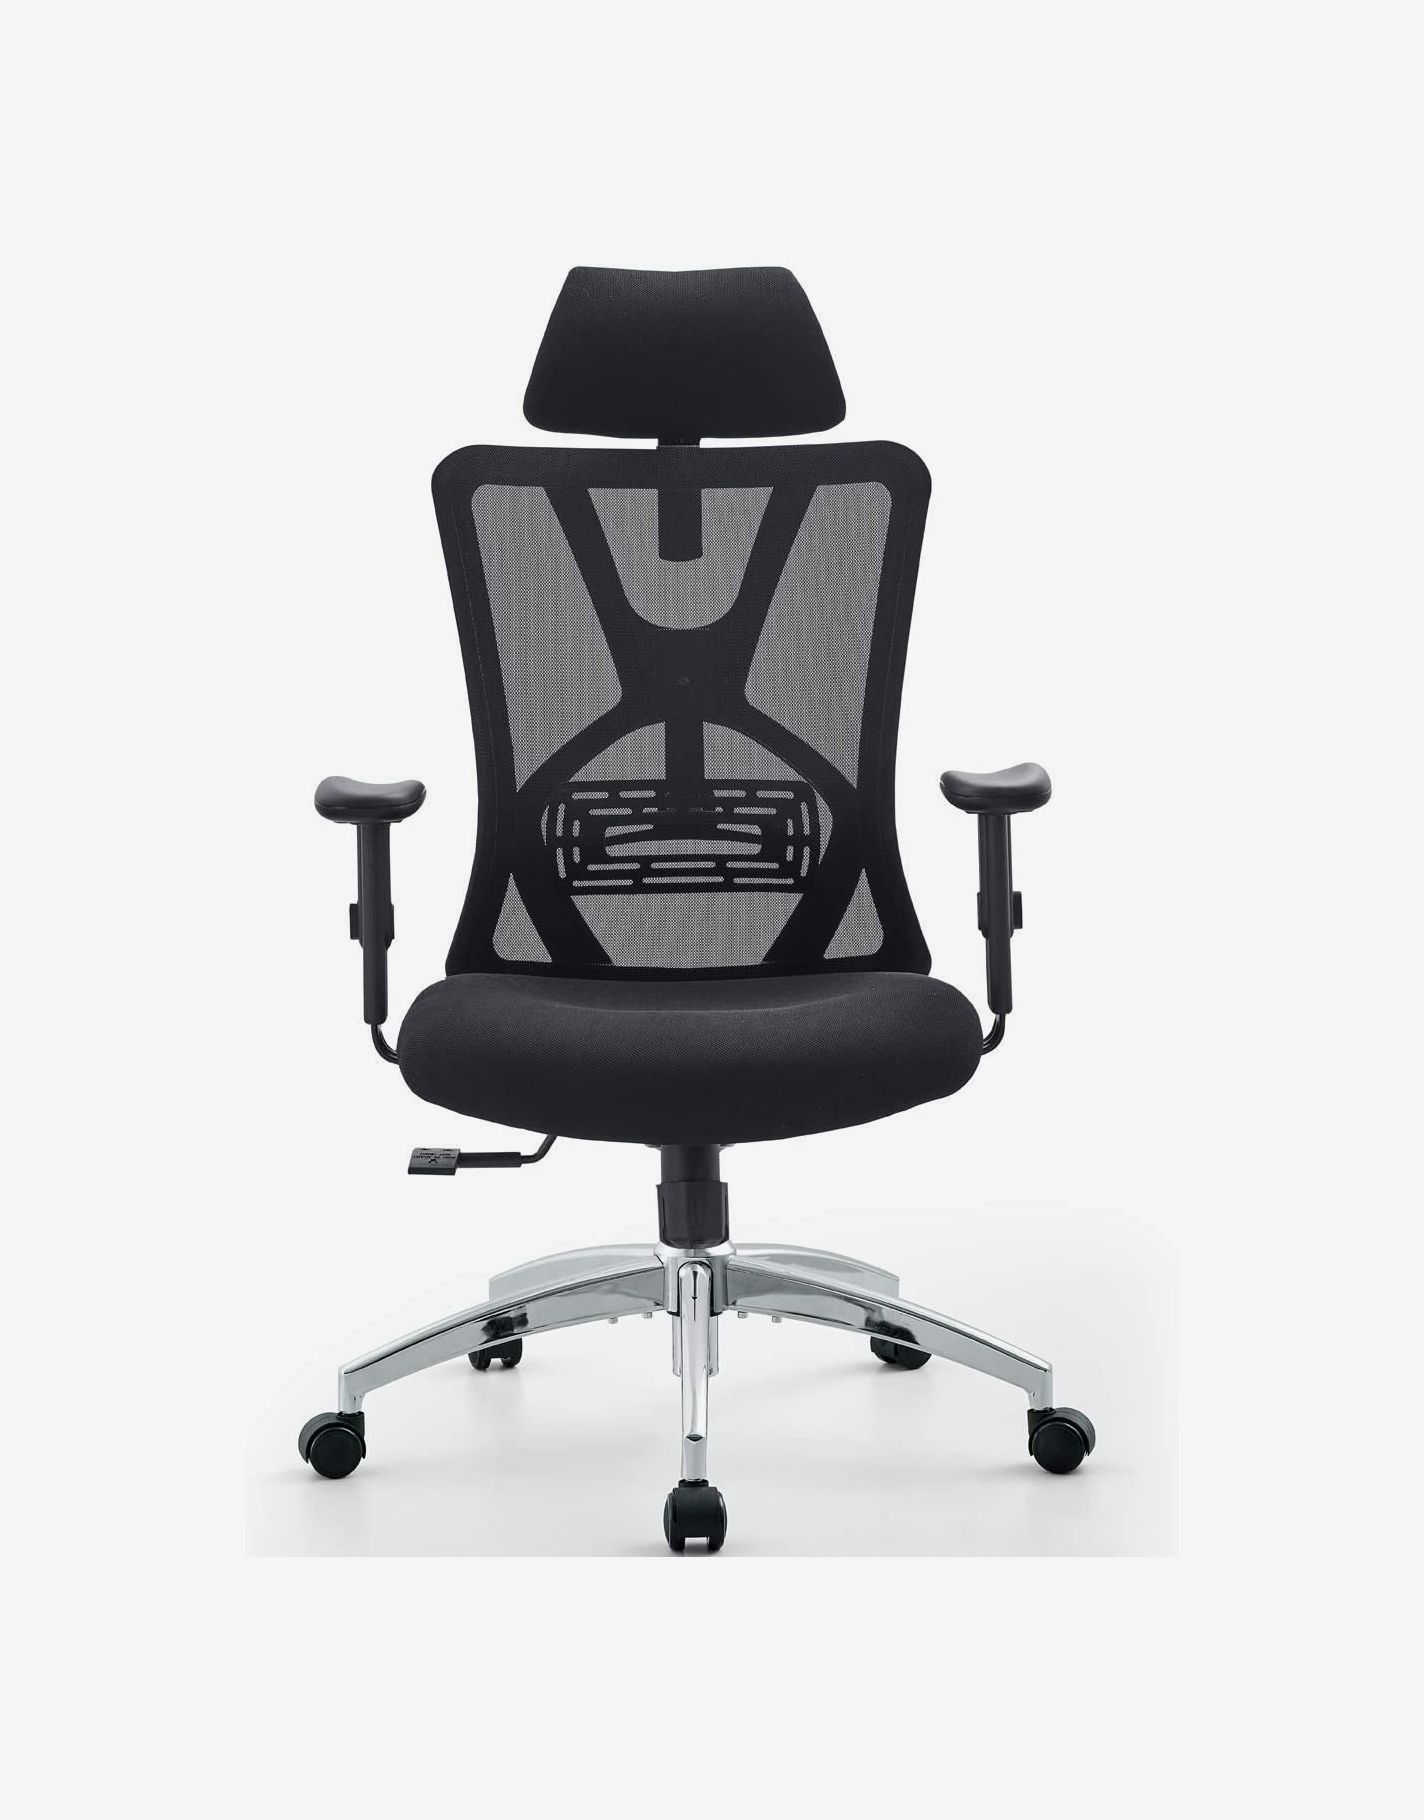 The Best Ergonomic Office Chairs 2022